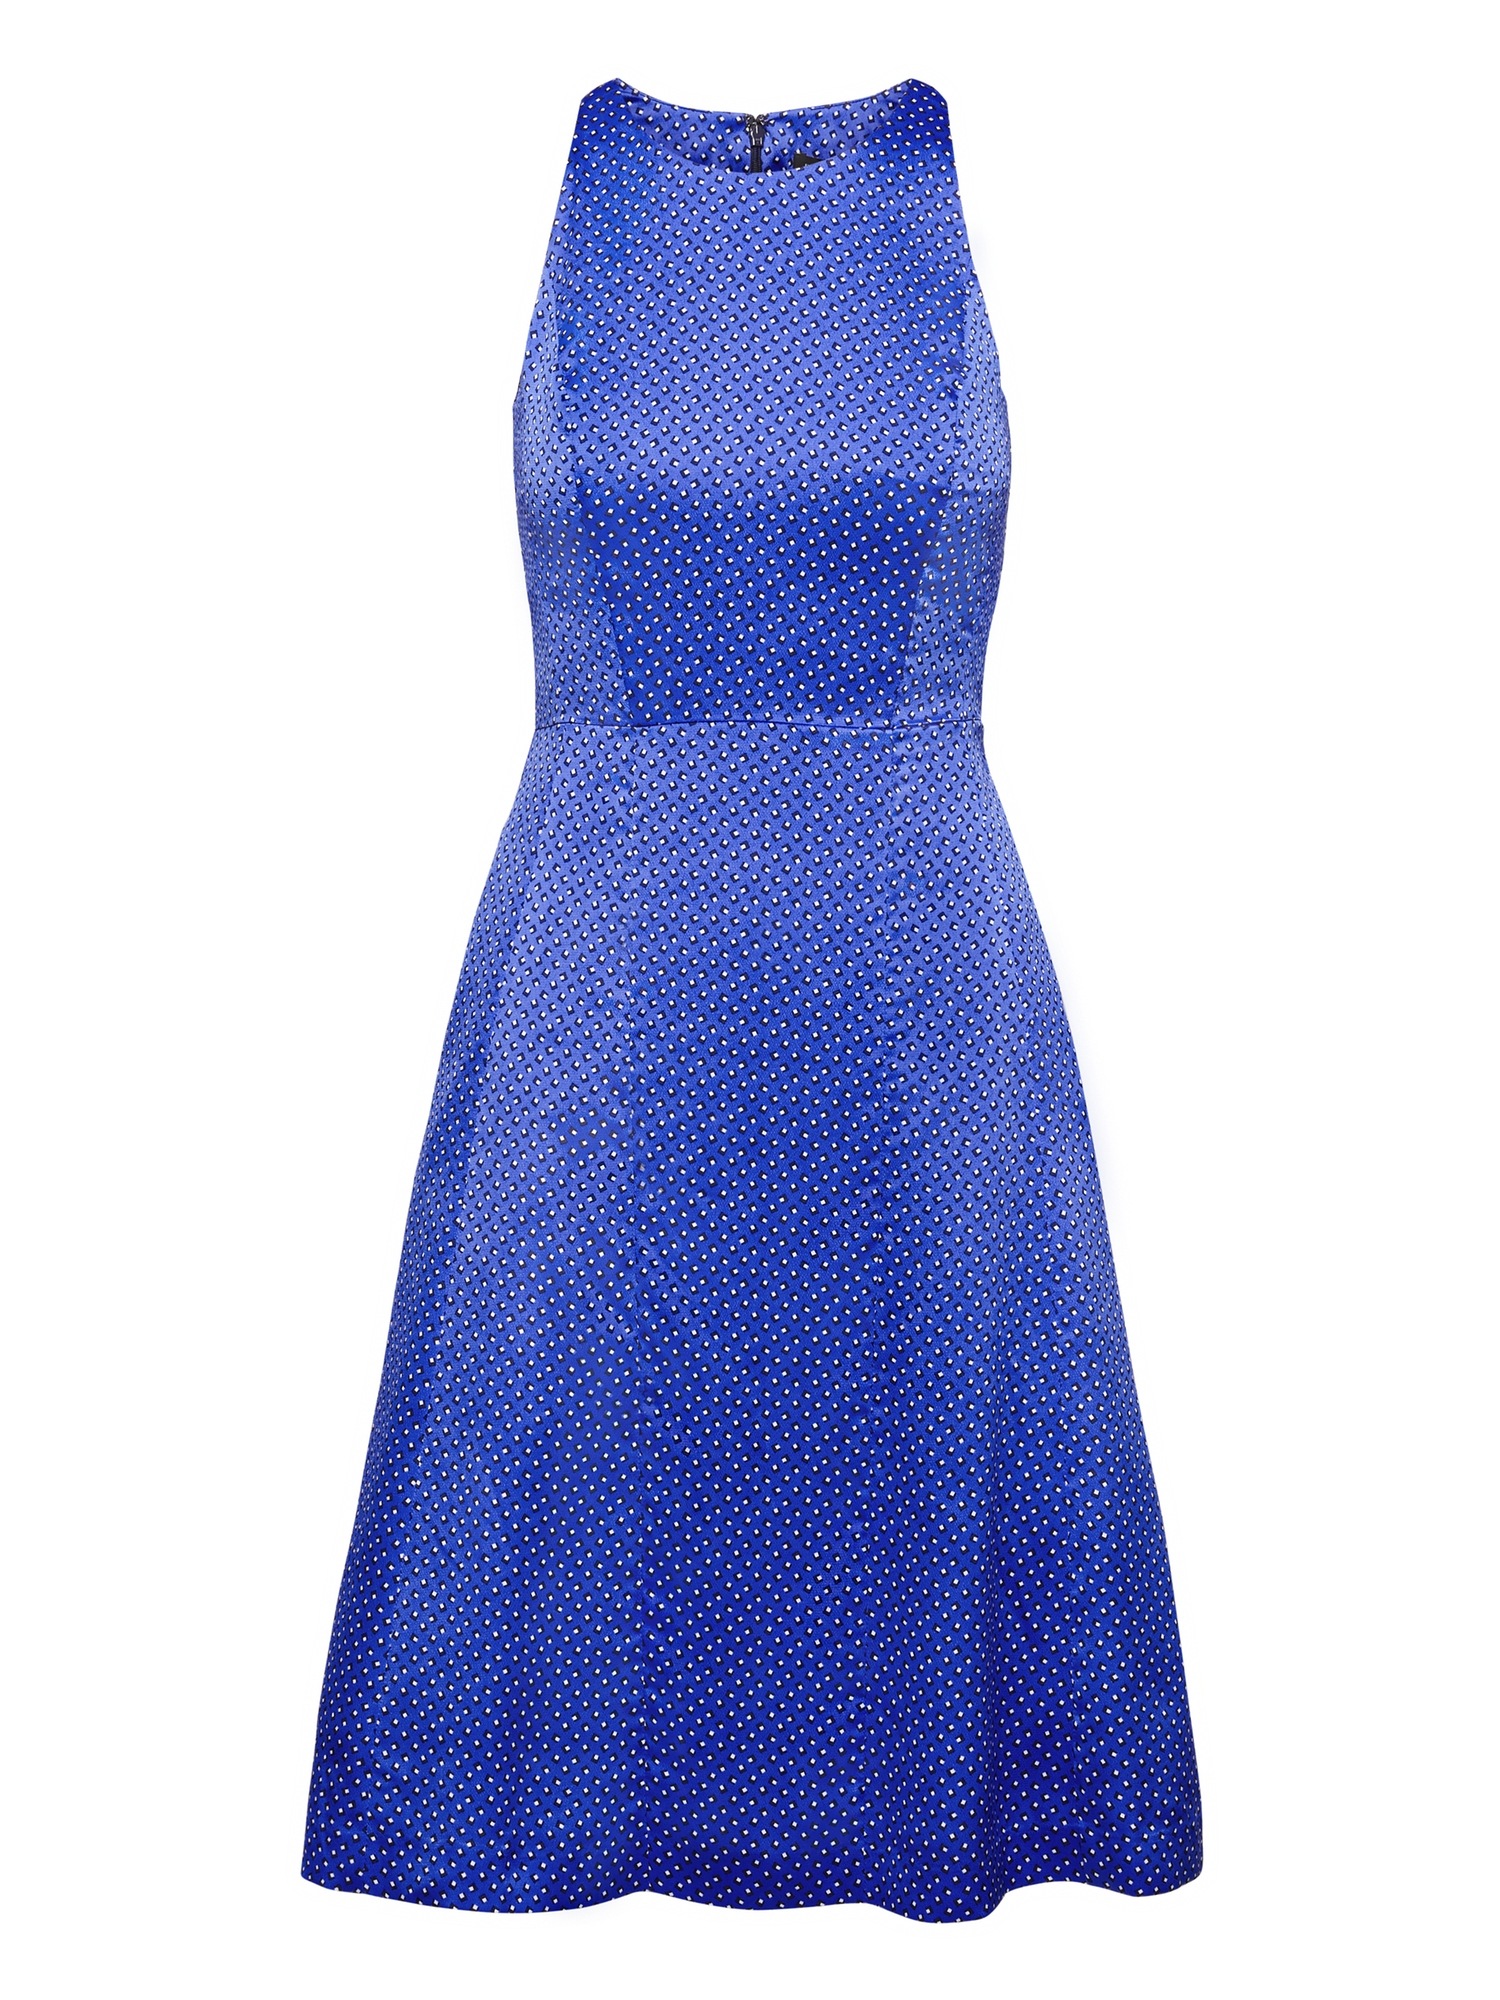 Dot Paneled Fit-and-Flare Dress